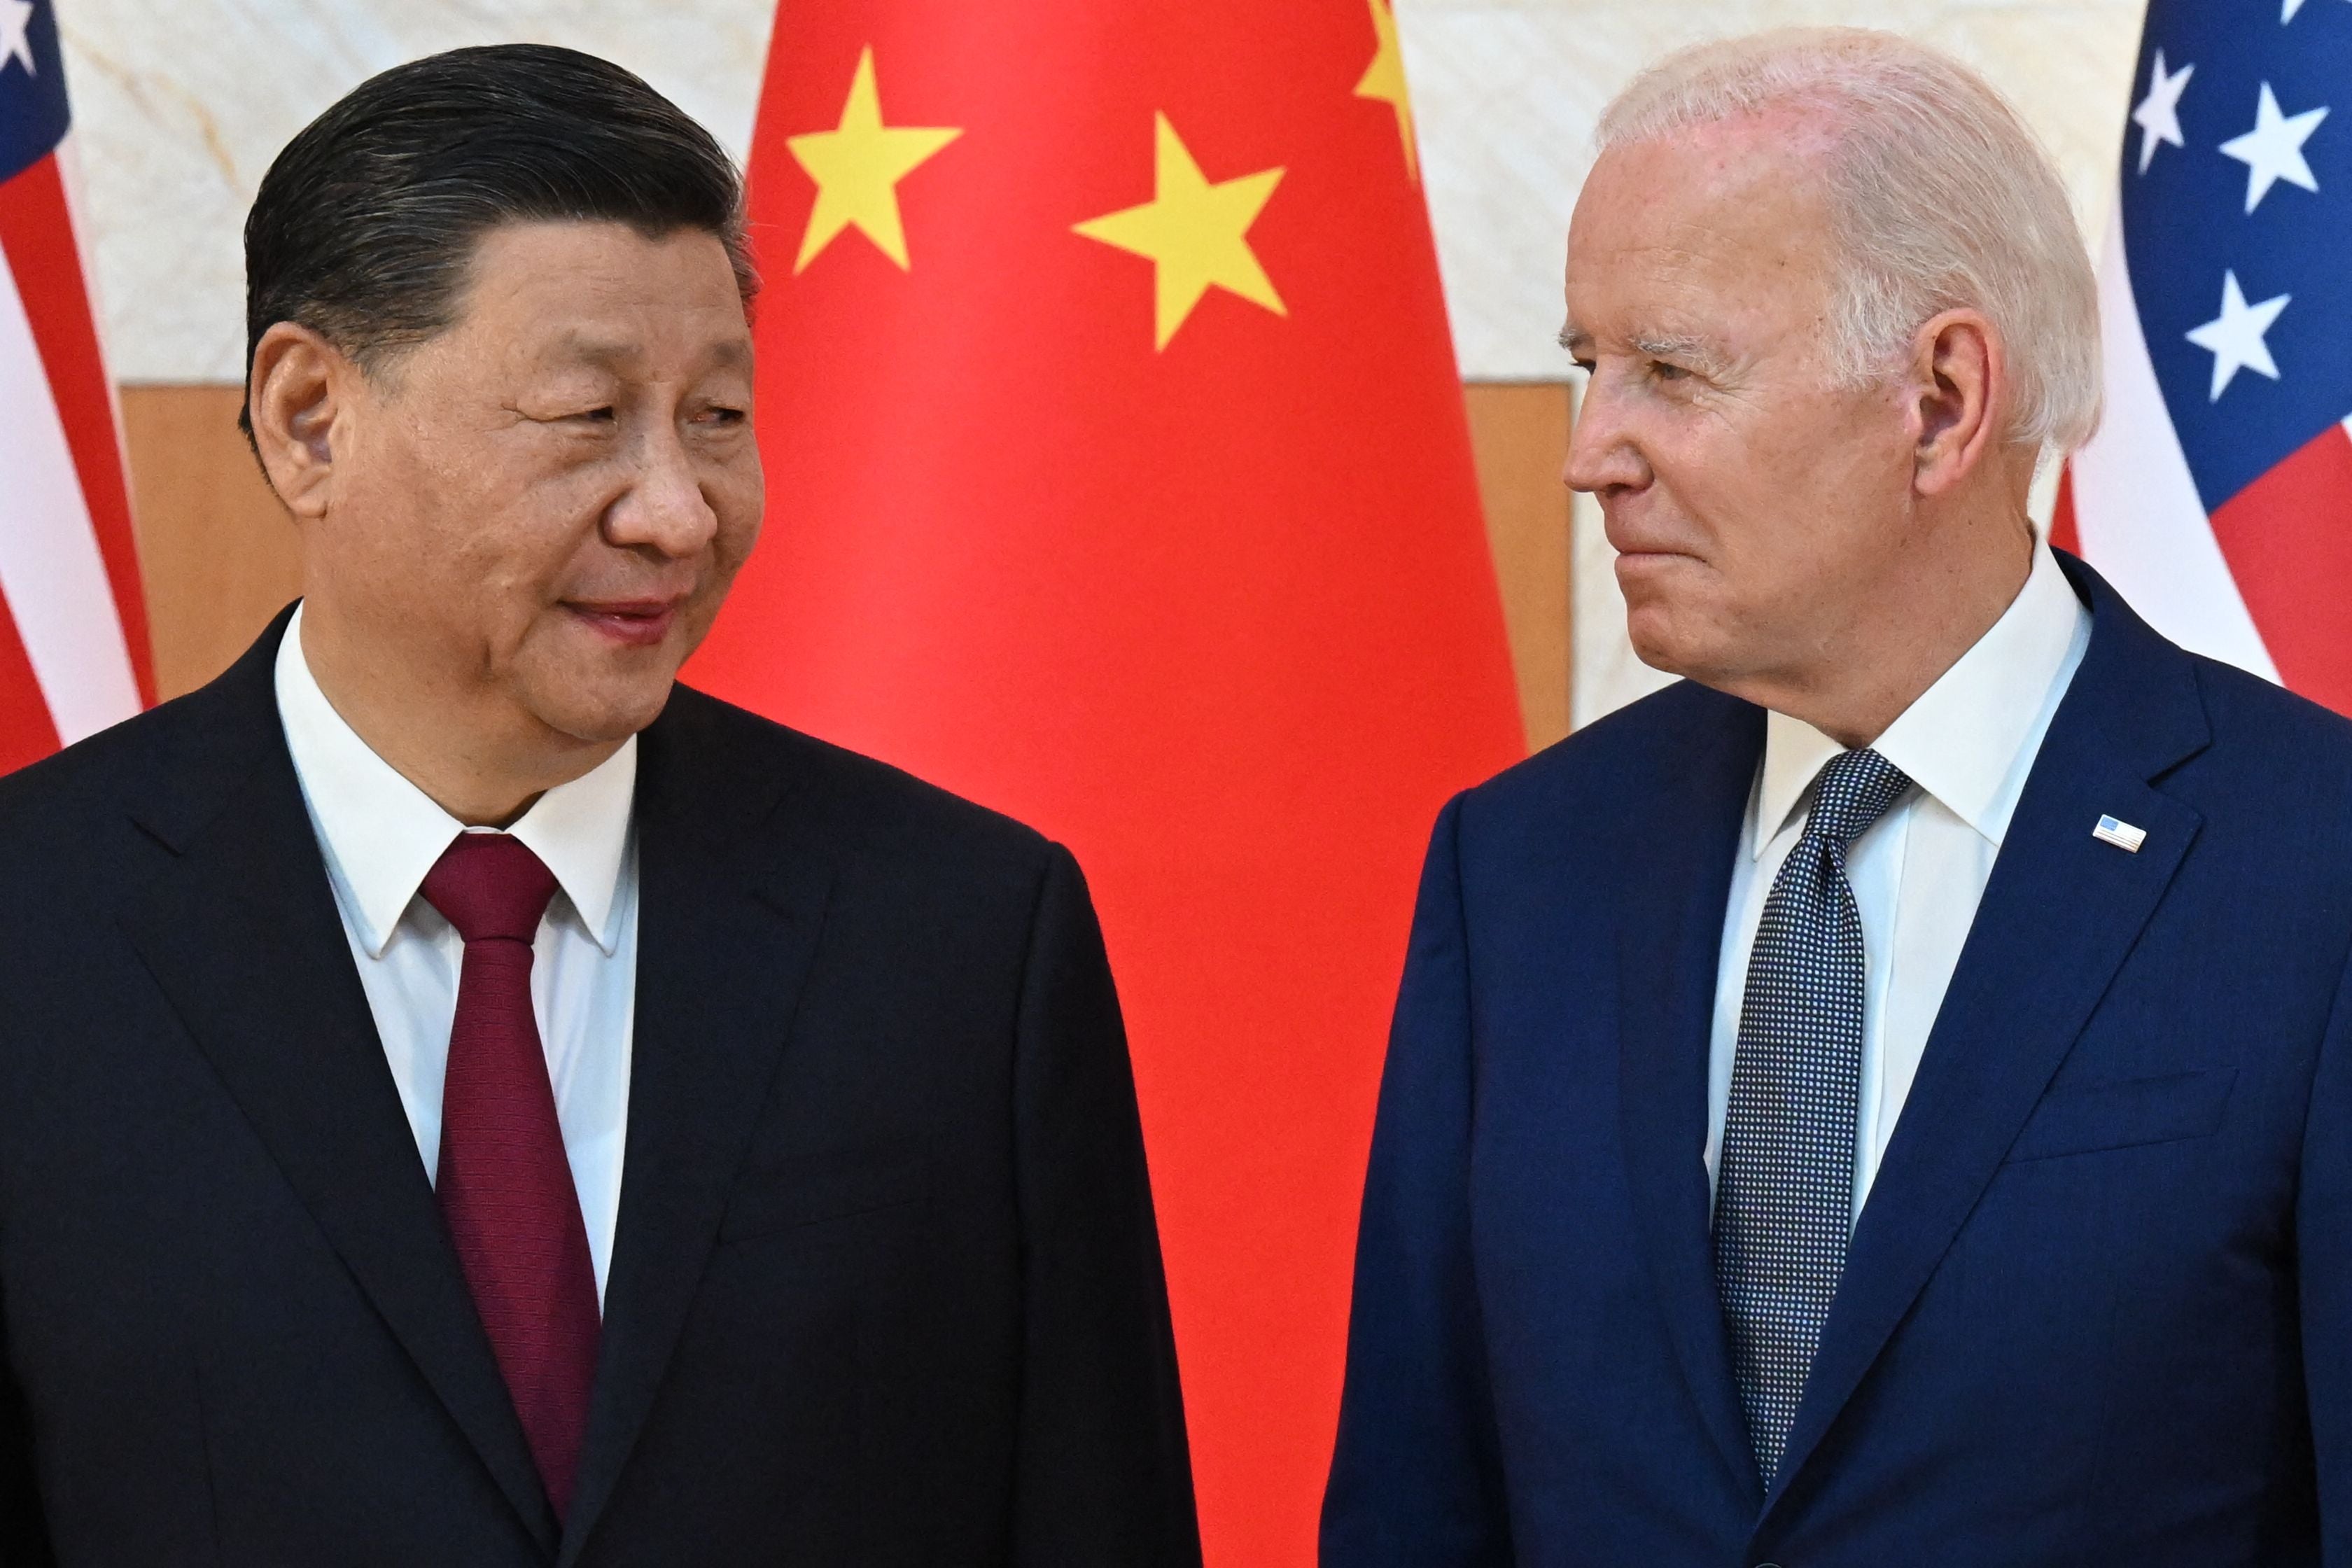 The midterm elections have given the Biden administration a new self-confidence and, as far as China is concerned, a new authority